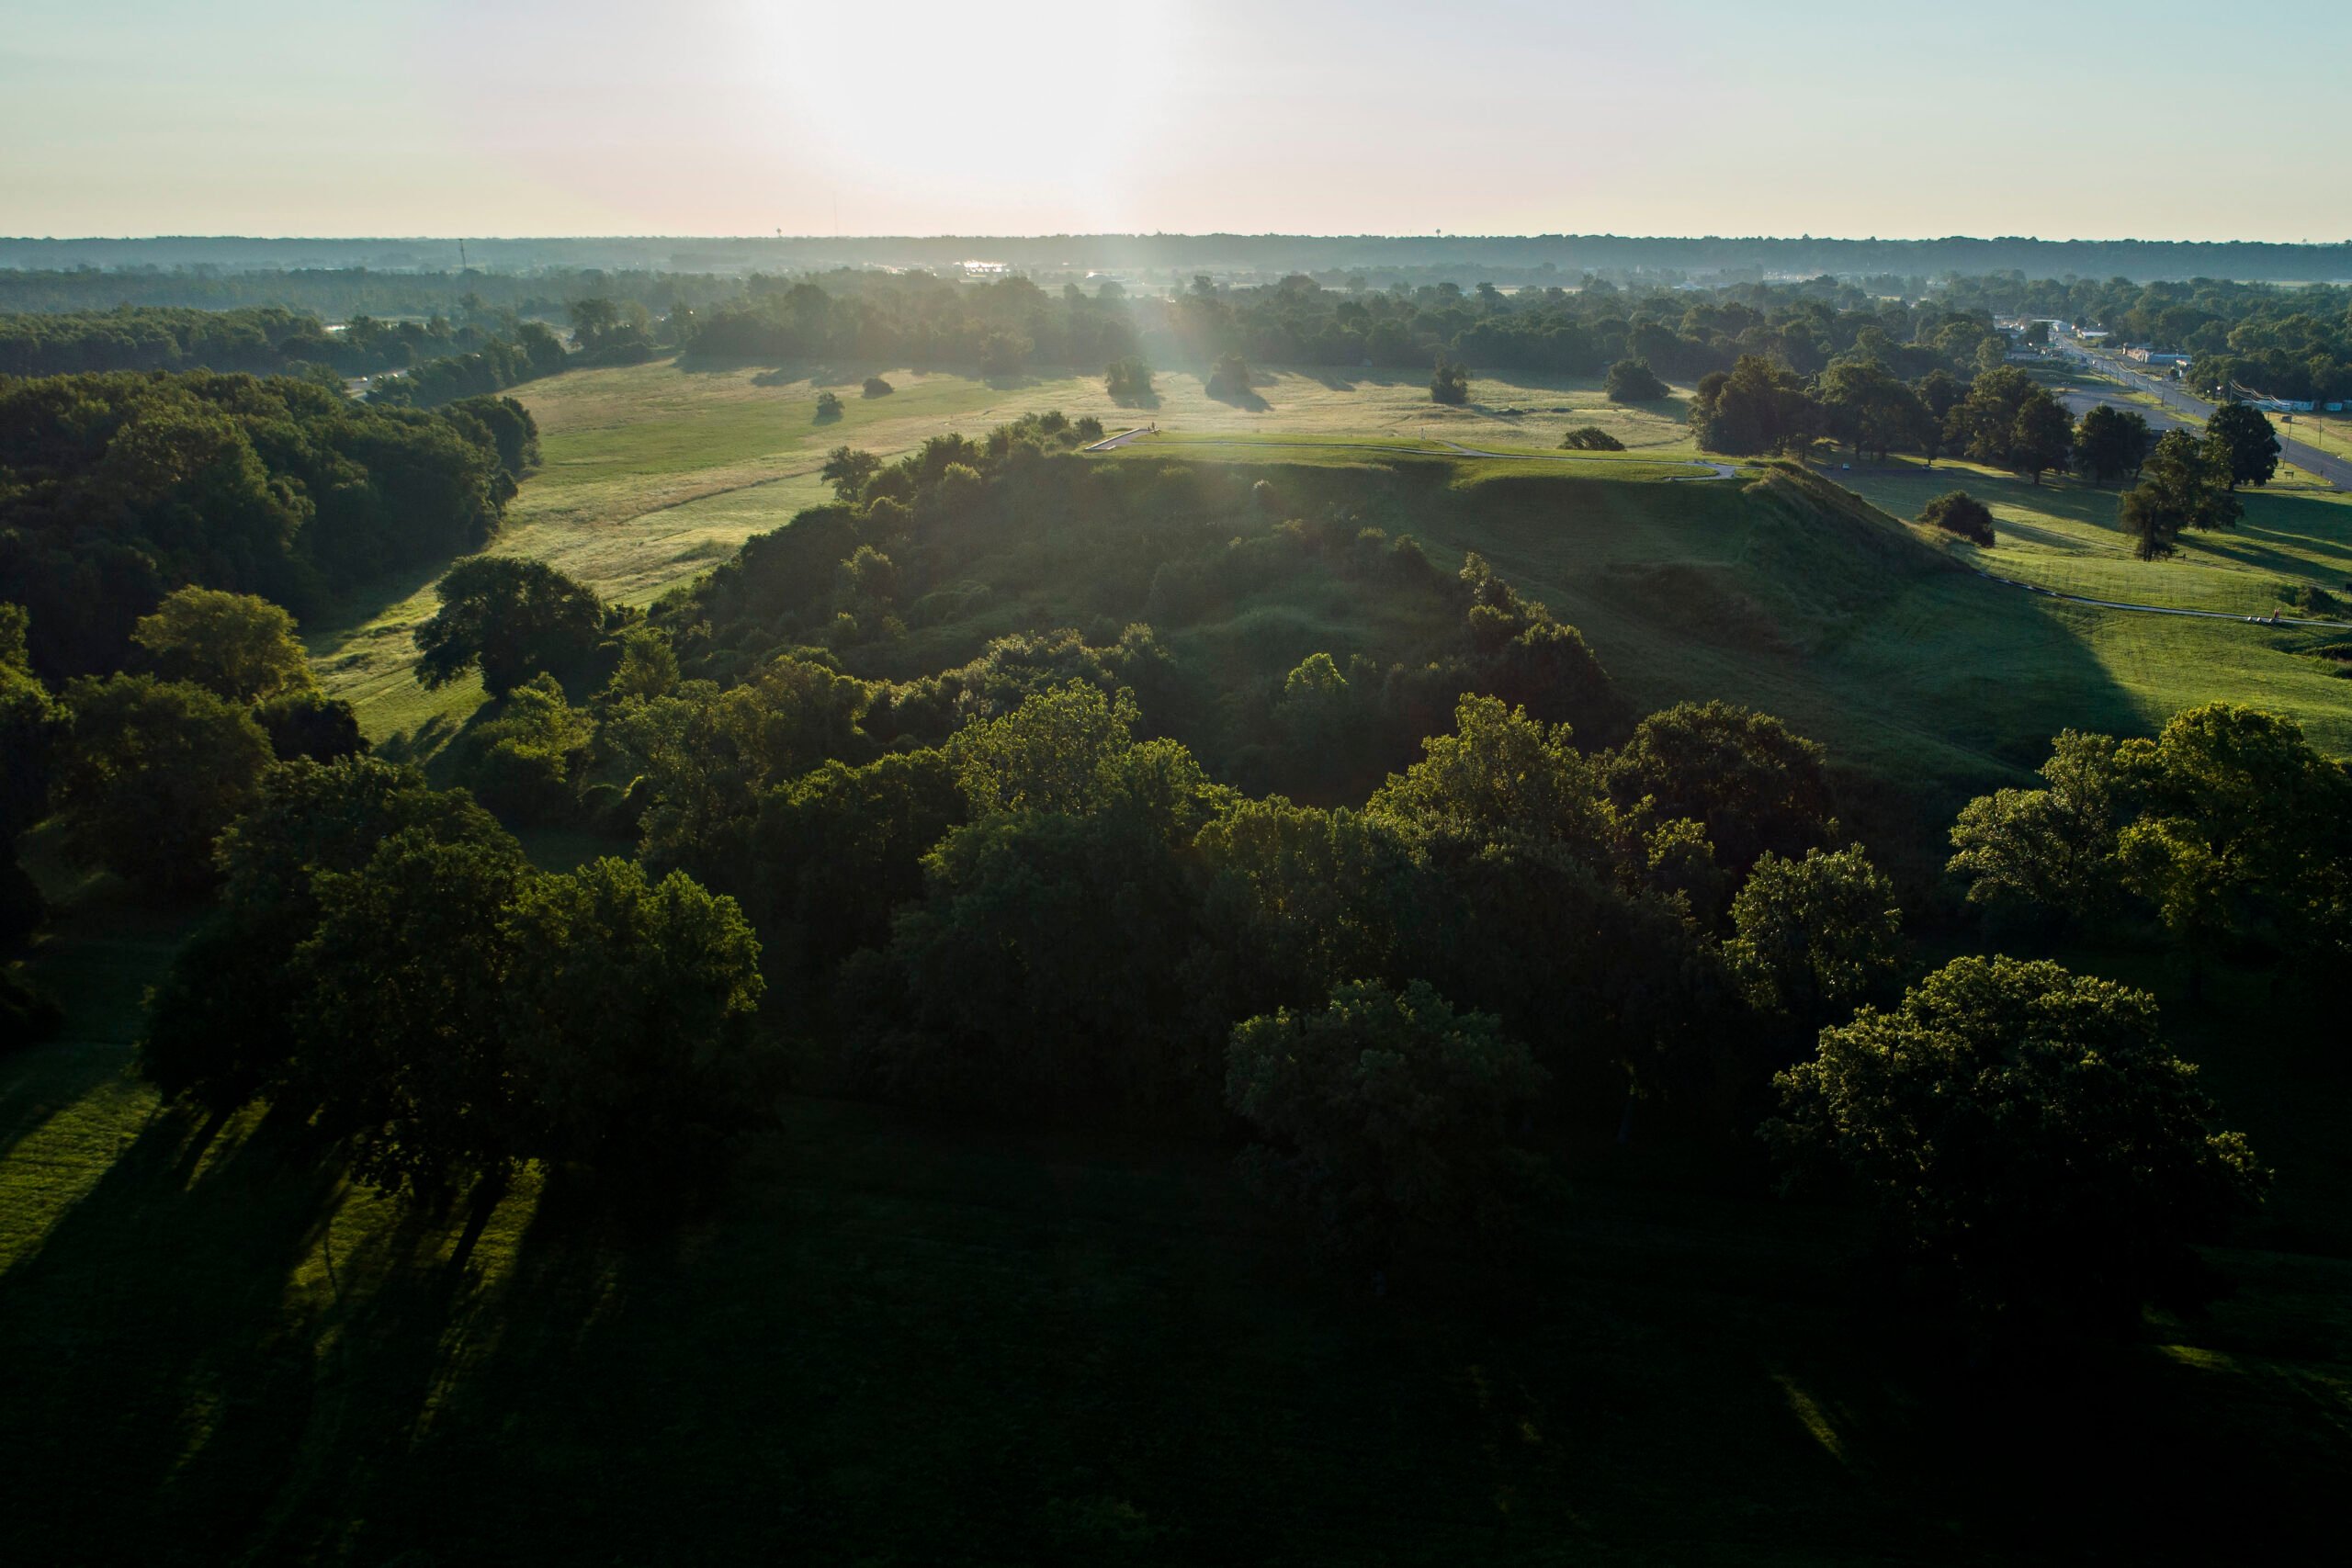 This aerial shot by Daniel Acker is captured as the sun is beginning to set, casting both a glow and shadows